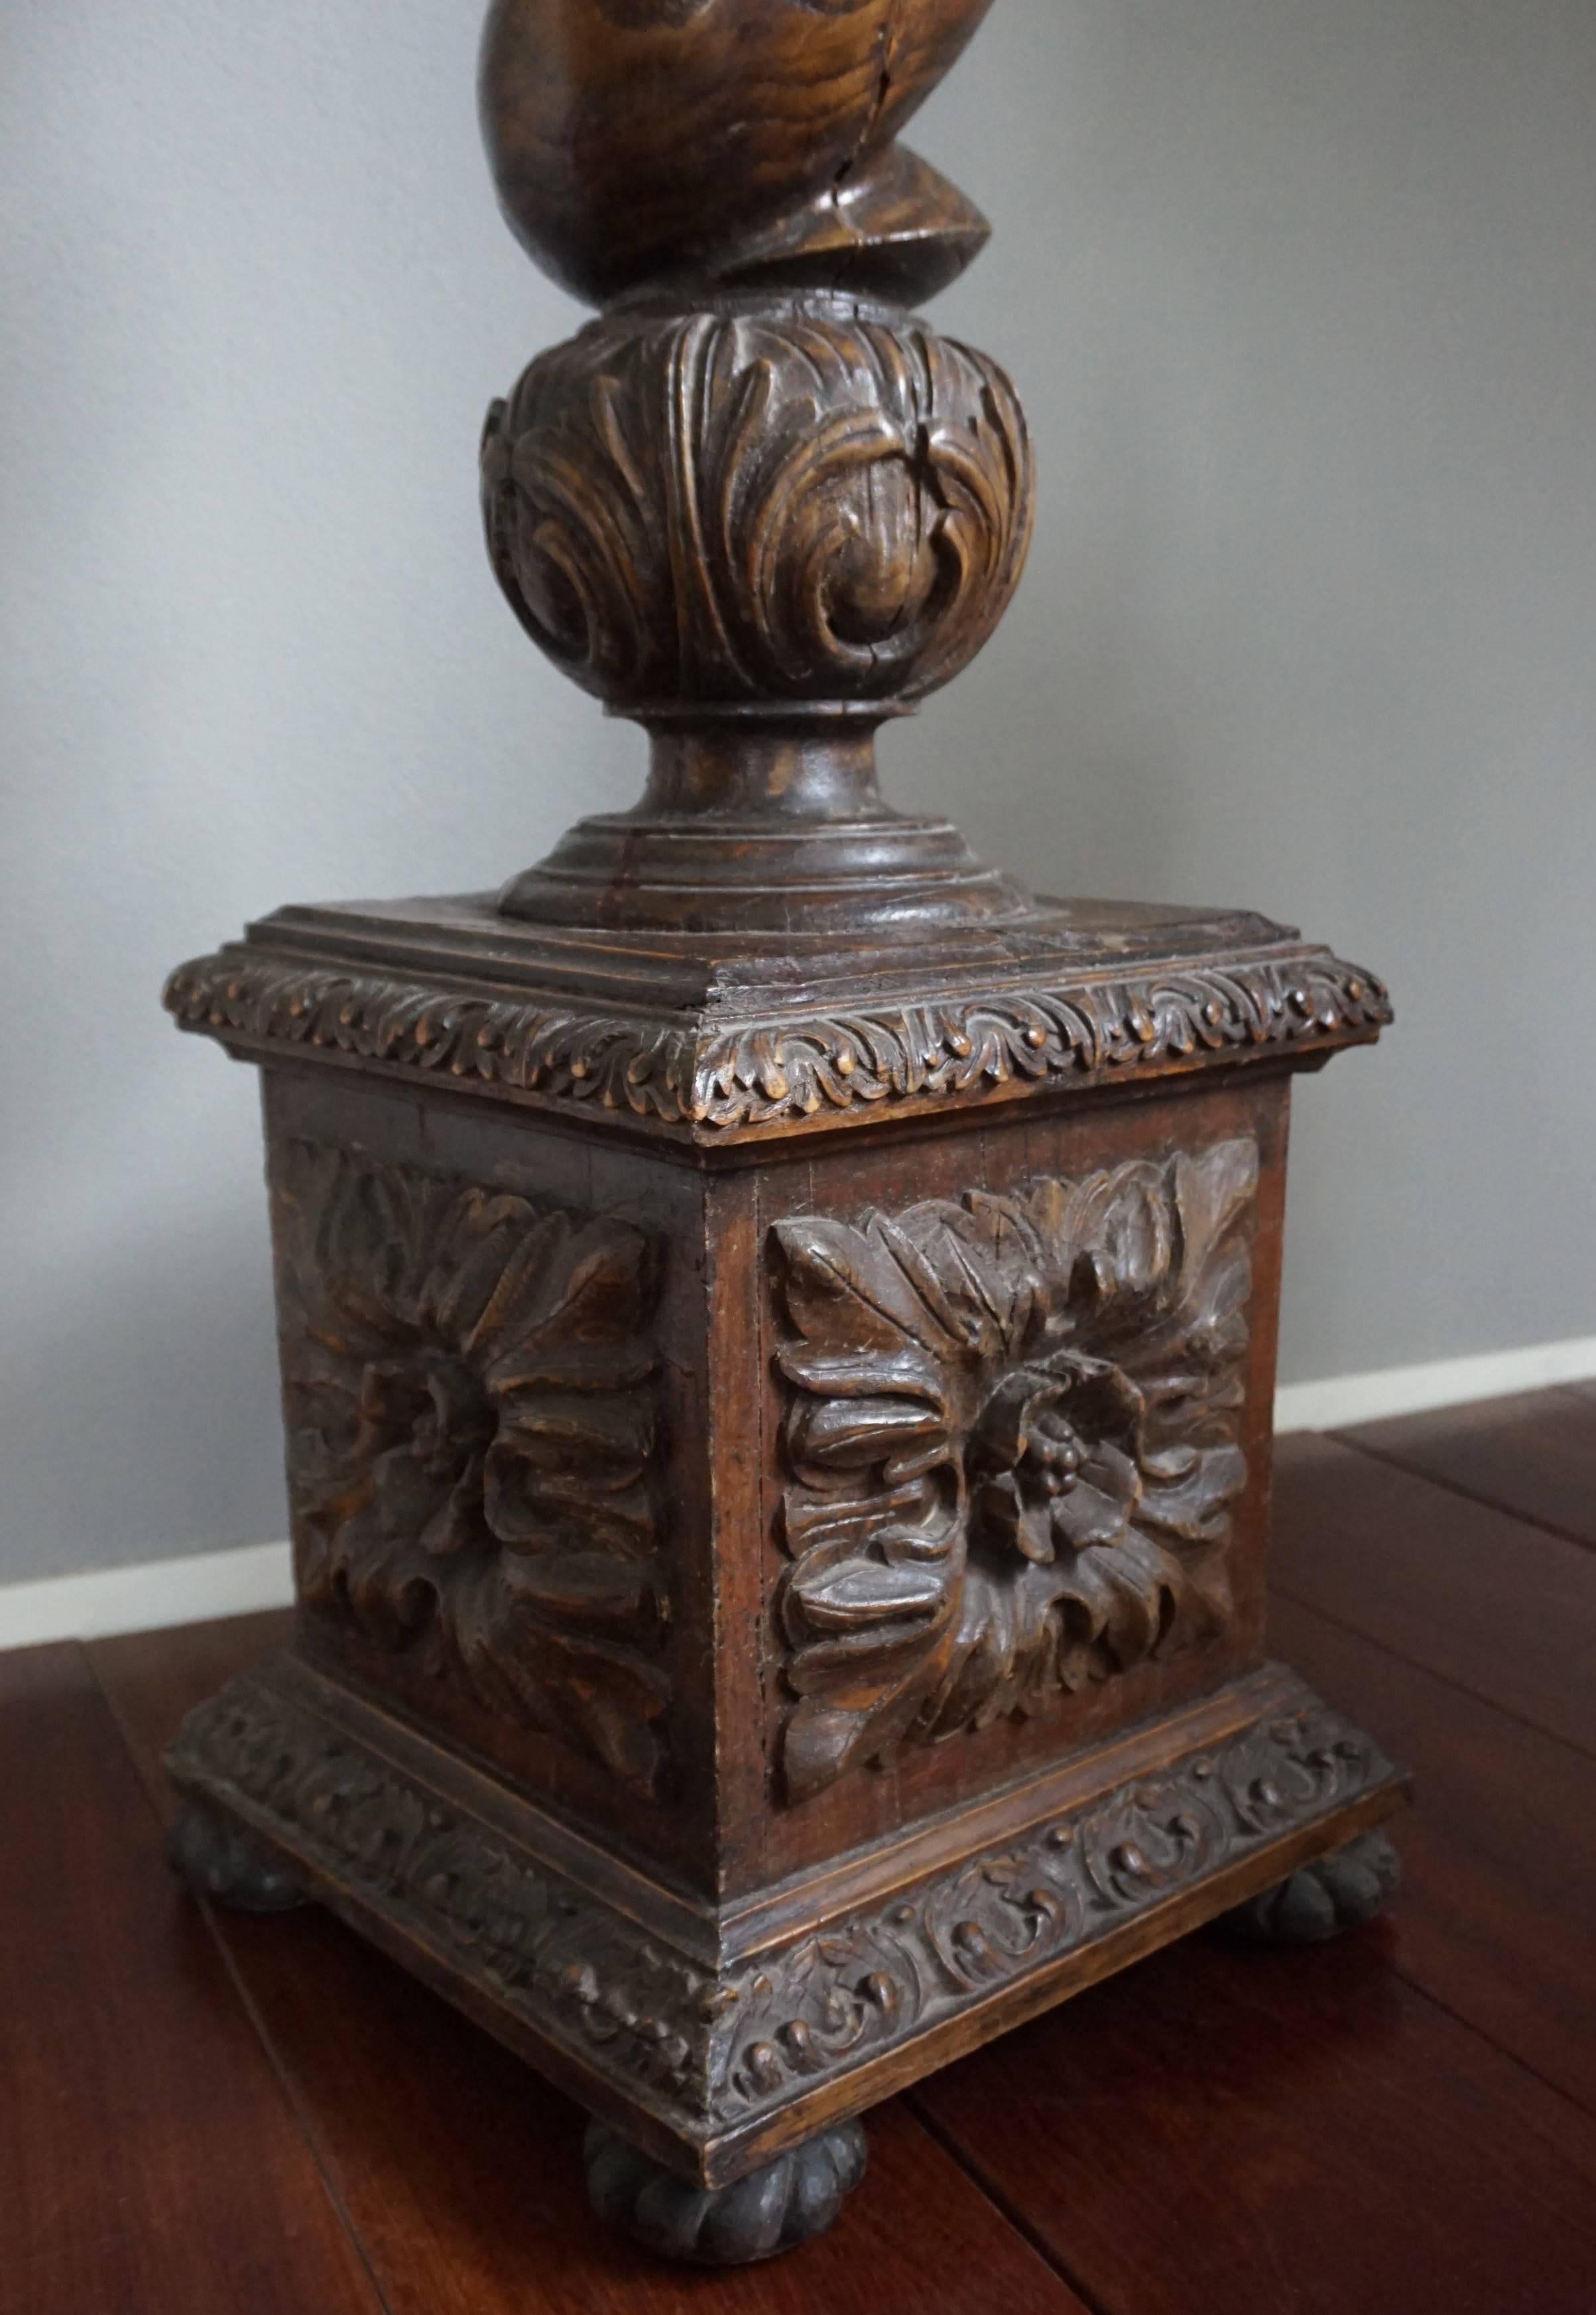 European Antique Large & Hand-Carved Mid-19th Century Baroque Pedestal / Sculpture Stand